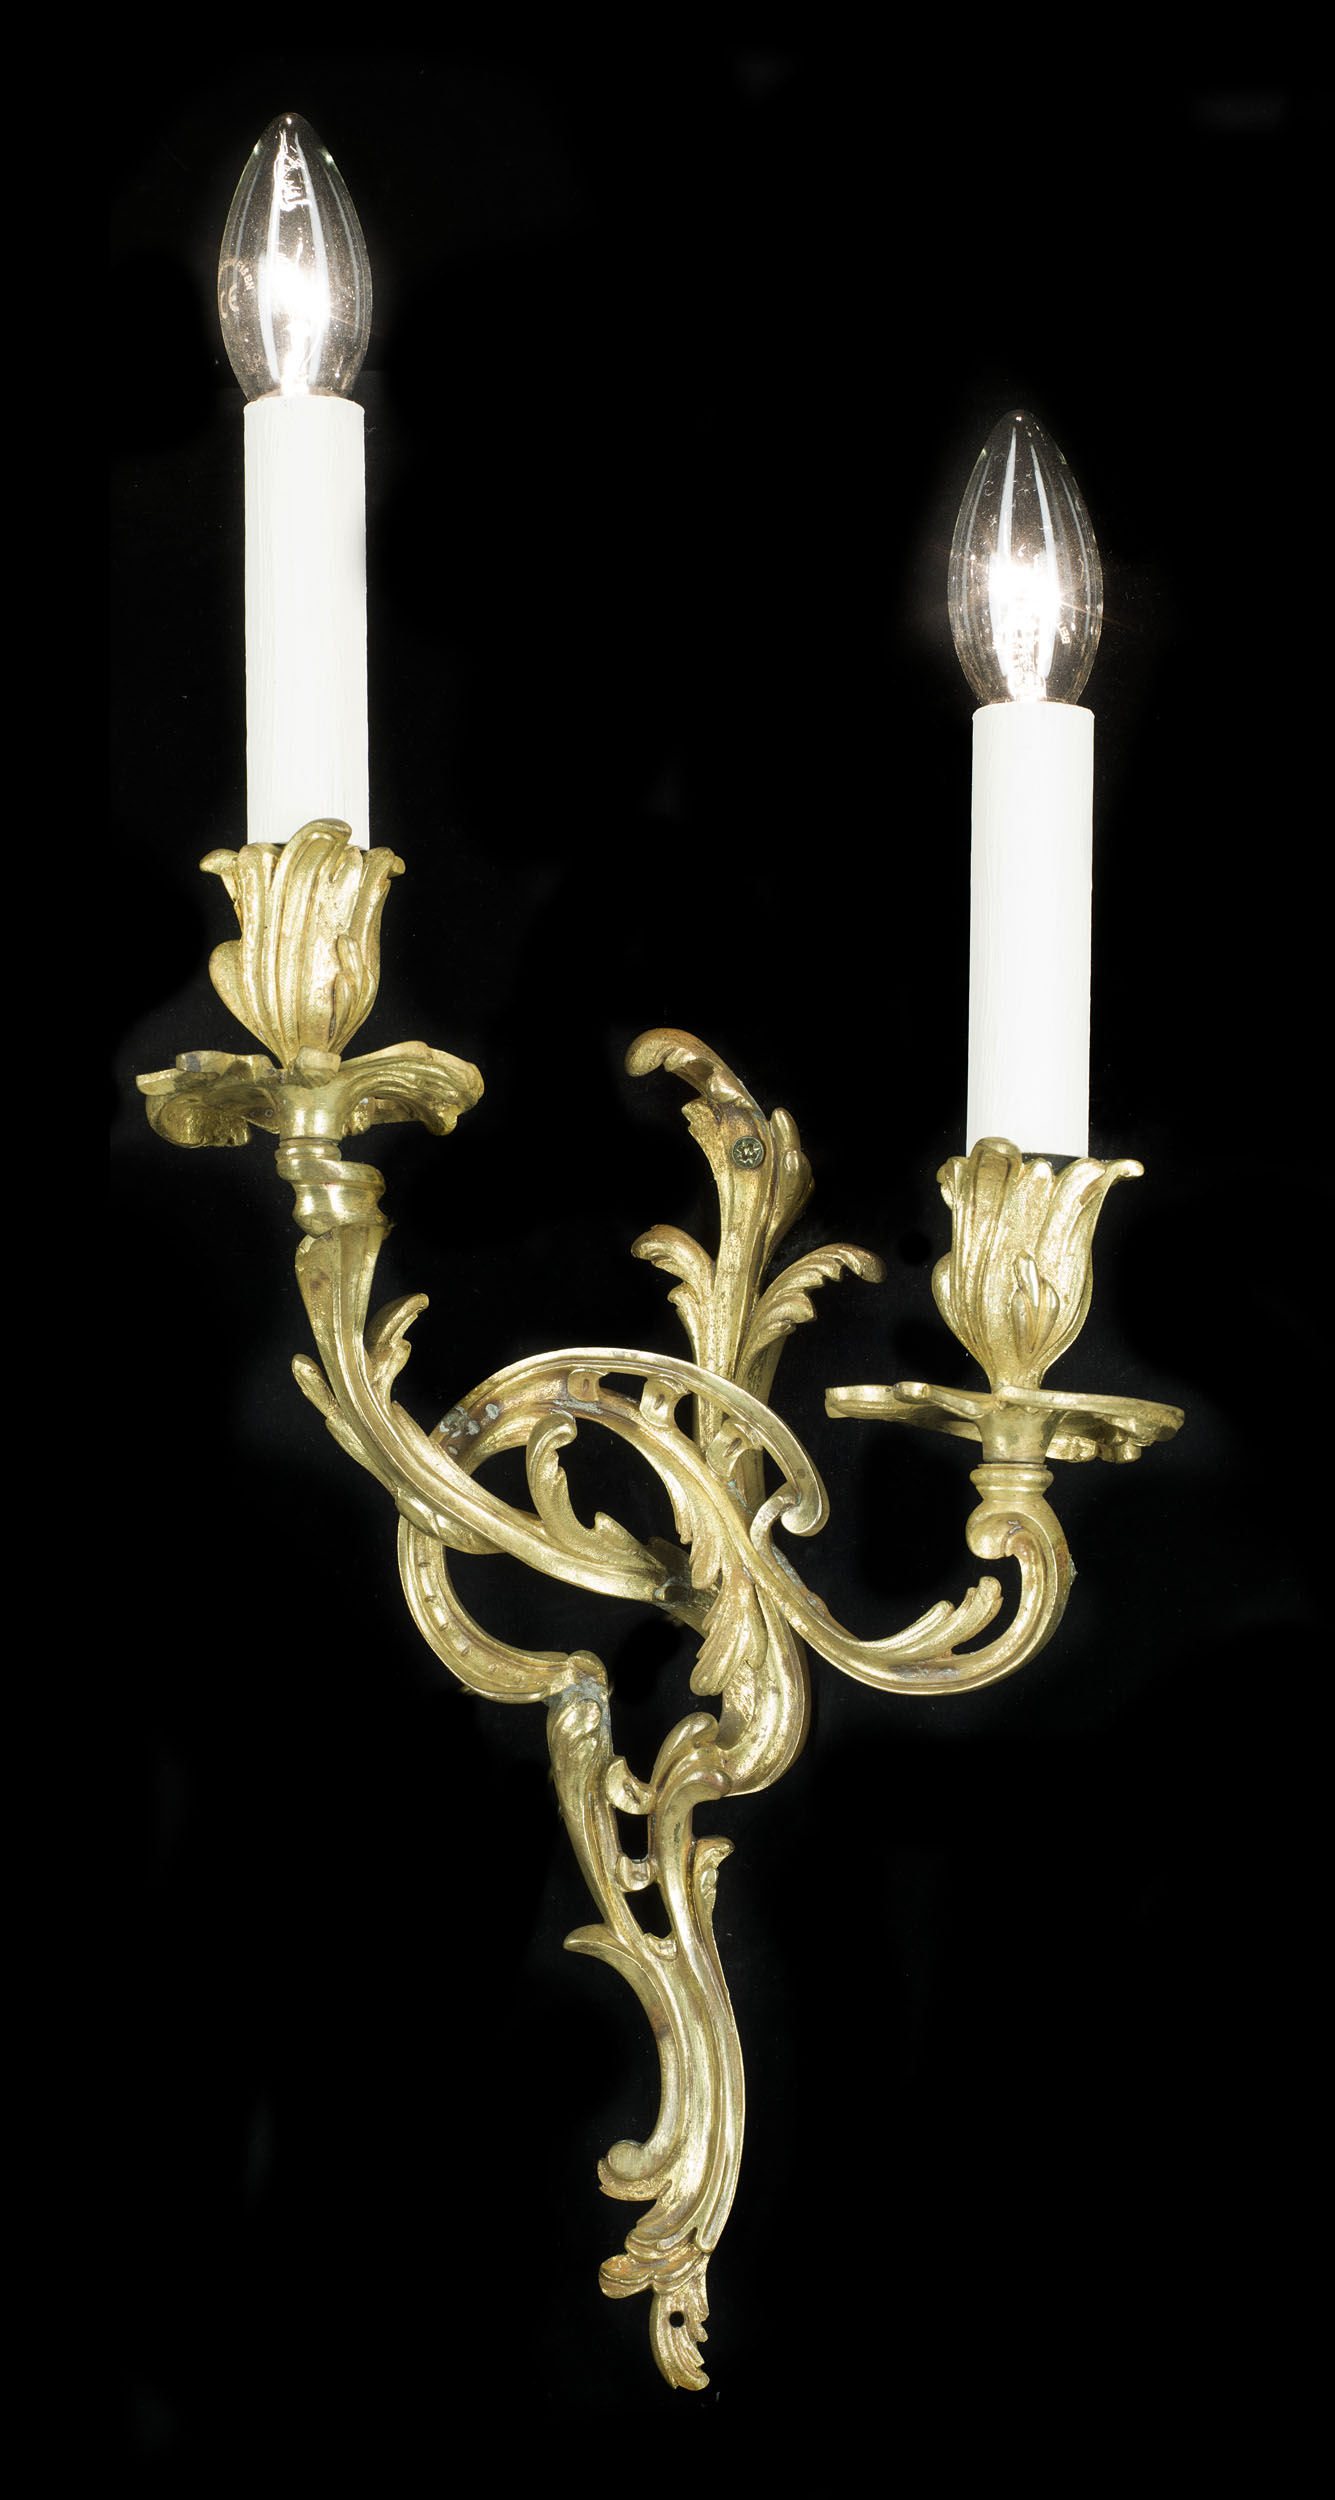 A Rococo Revival Pair of Brass Wall Lights